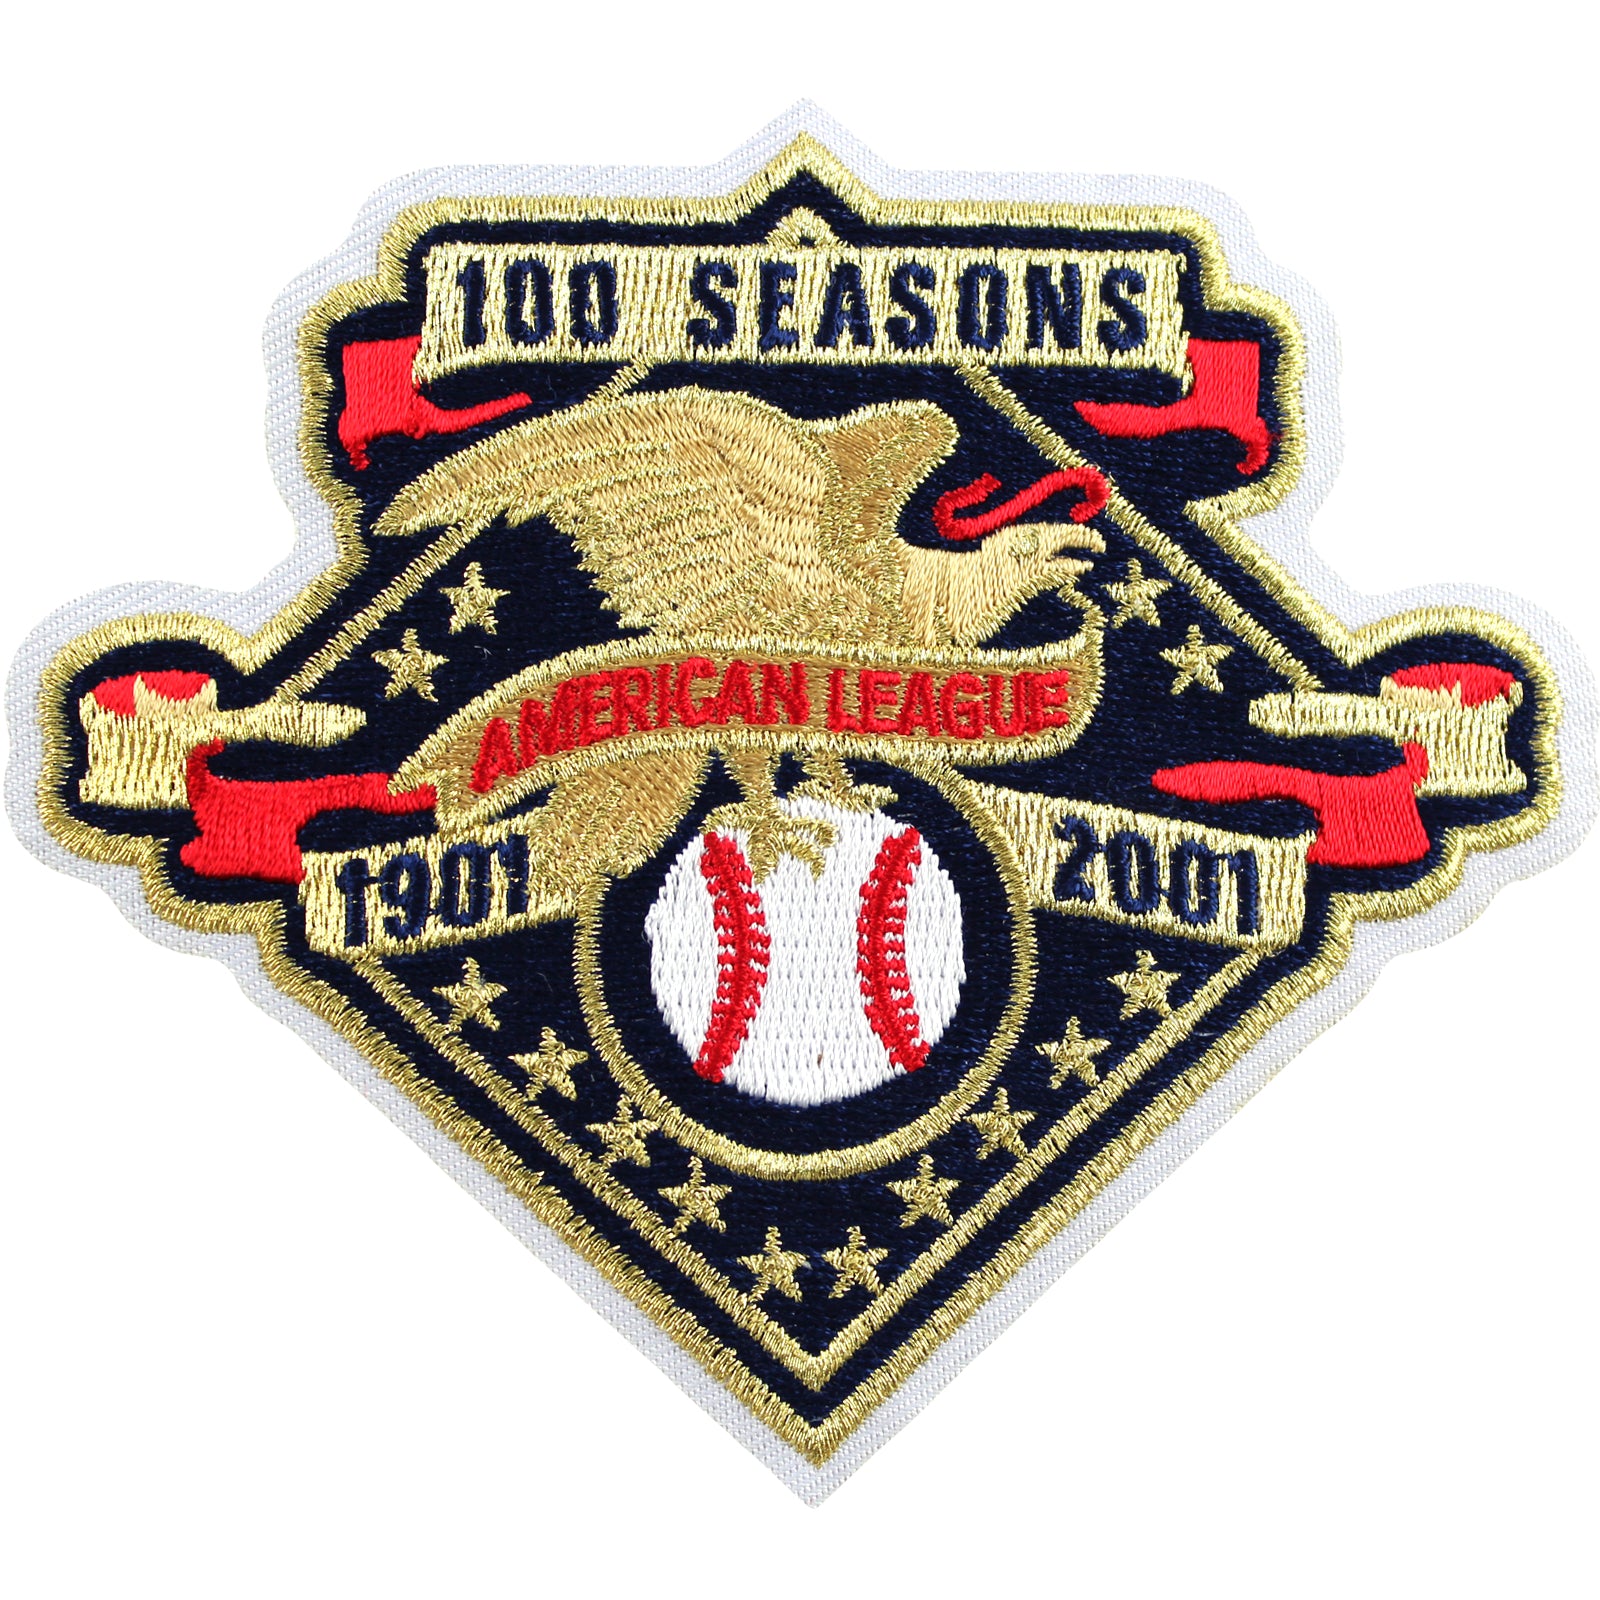 2001 AMERICAN LEAGUE 100TH YEAR Charter Member OFFICIAL MLB PATCH